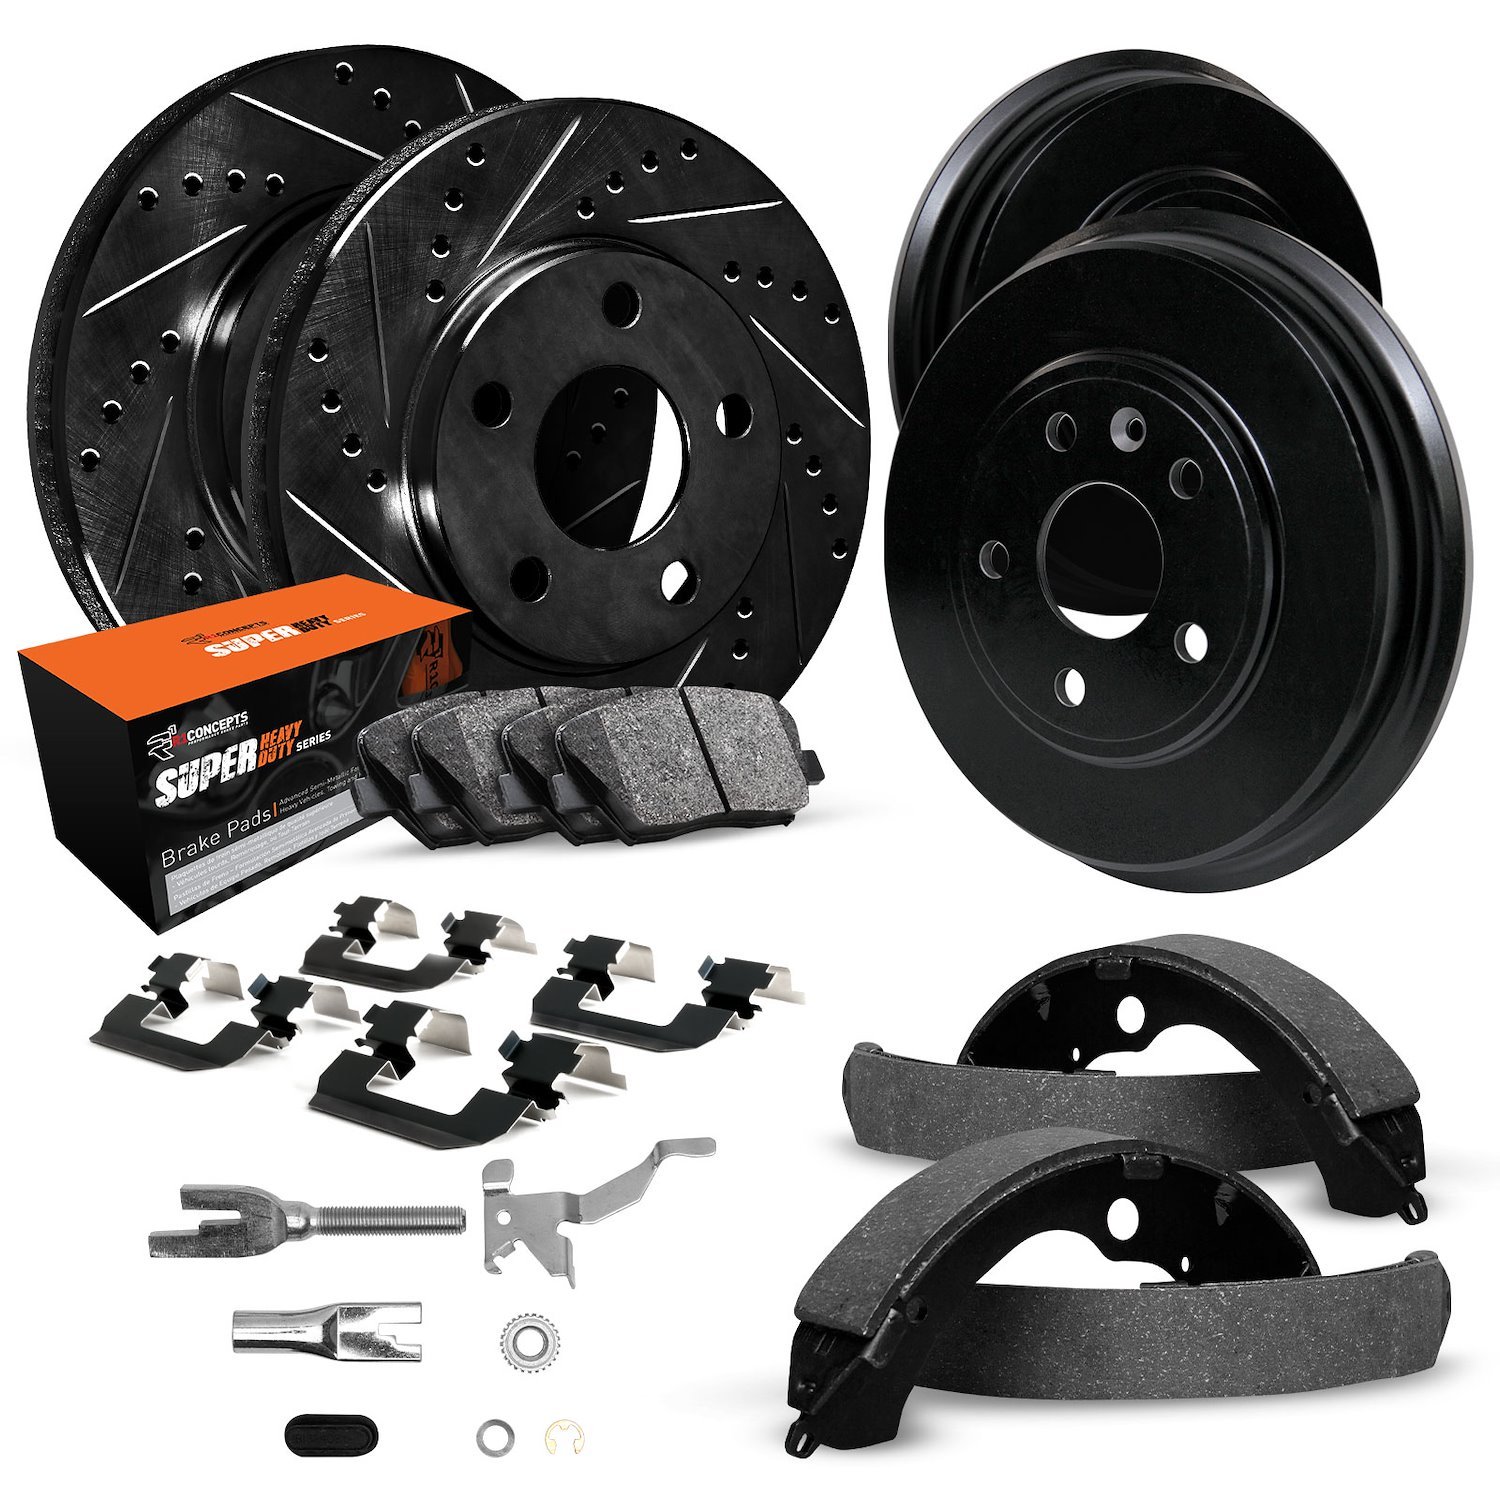 E-Line Drilled/Slotted Black Rotor & Drum Set w/Super-Duty Pads, Shoes, Hardware/Adjusters, 1992-1994 Ford/Lincoln/Mercury/Mazda